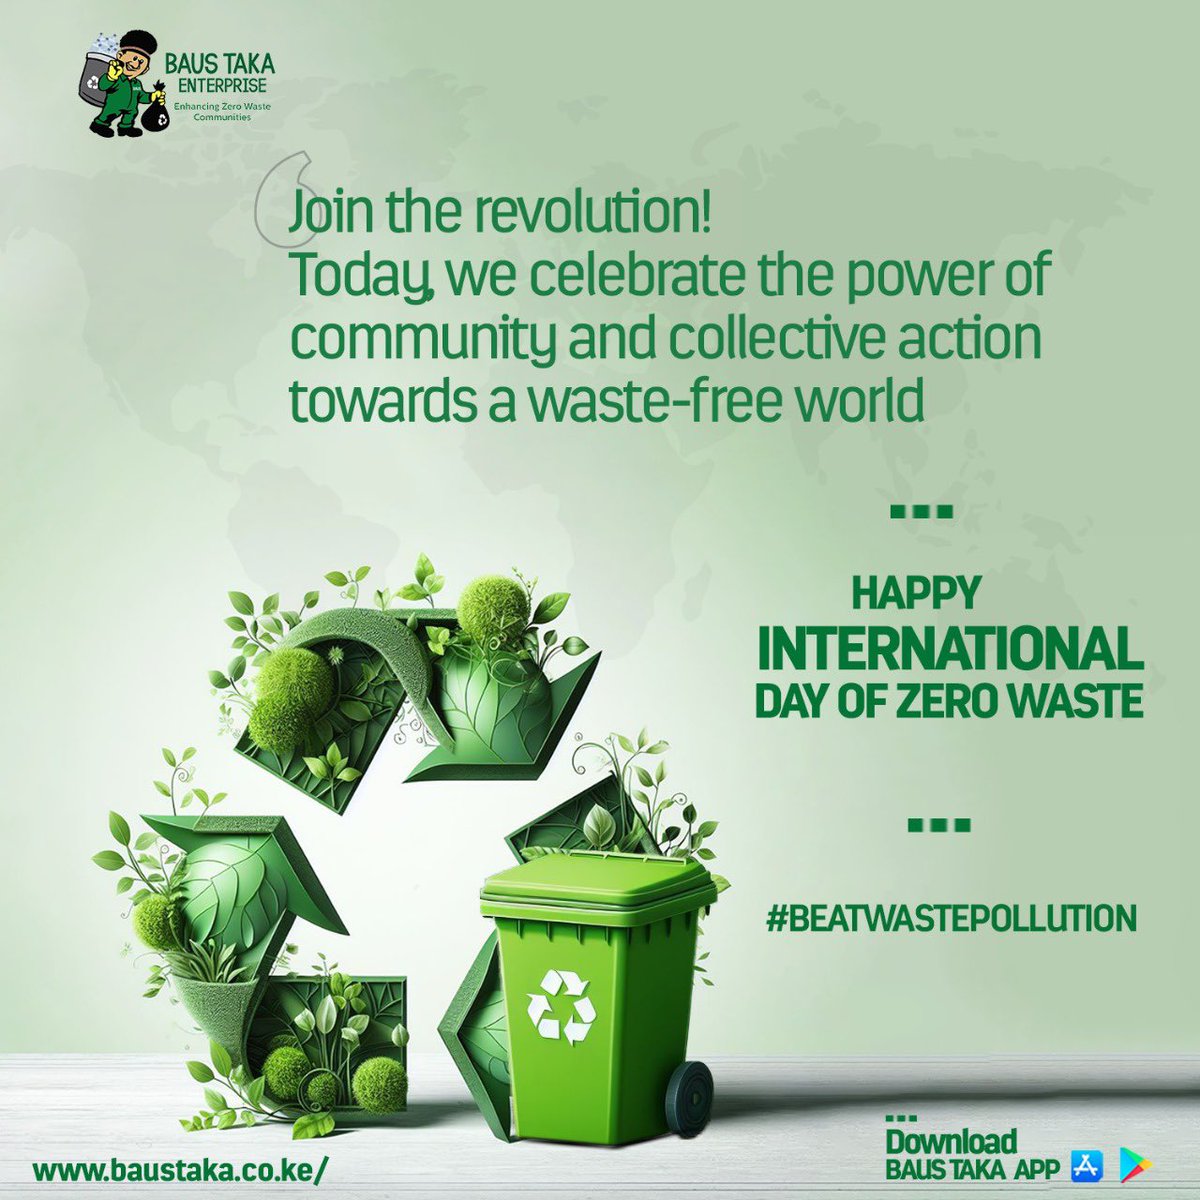 Join the revolution : 

Today, we celebrate the power of community and collective action towards a waste-free world!

HAPPY INTERNATIONAL DAY OF ZERO WASTE 💚

#BeatWastePollution